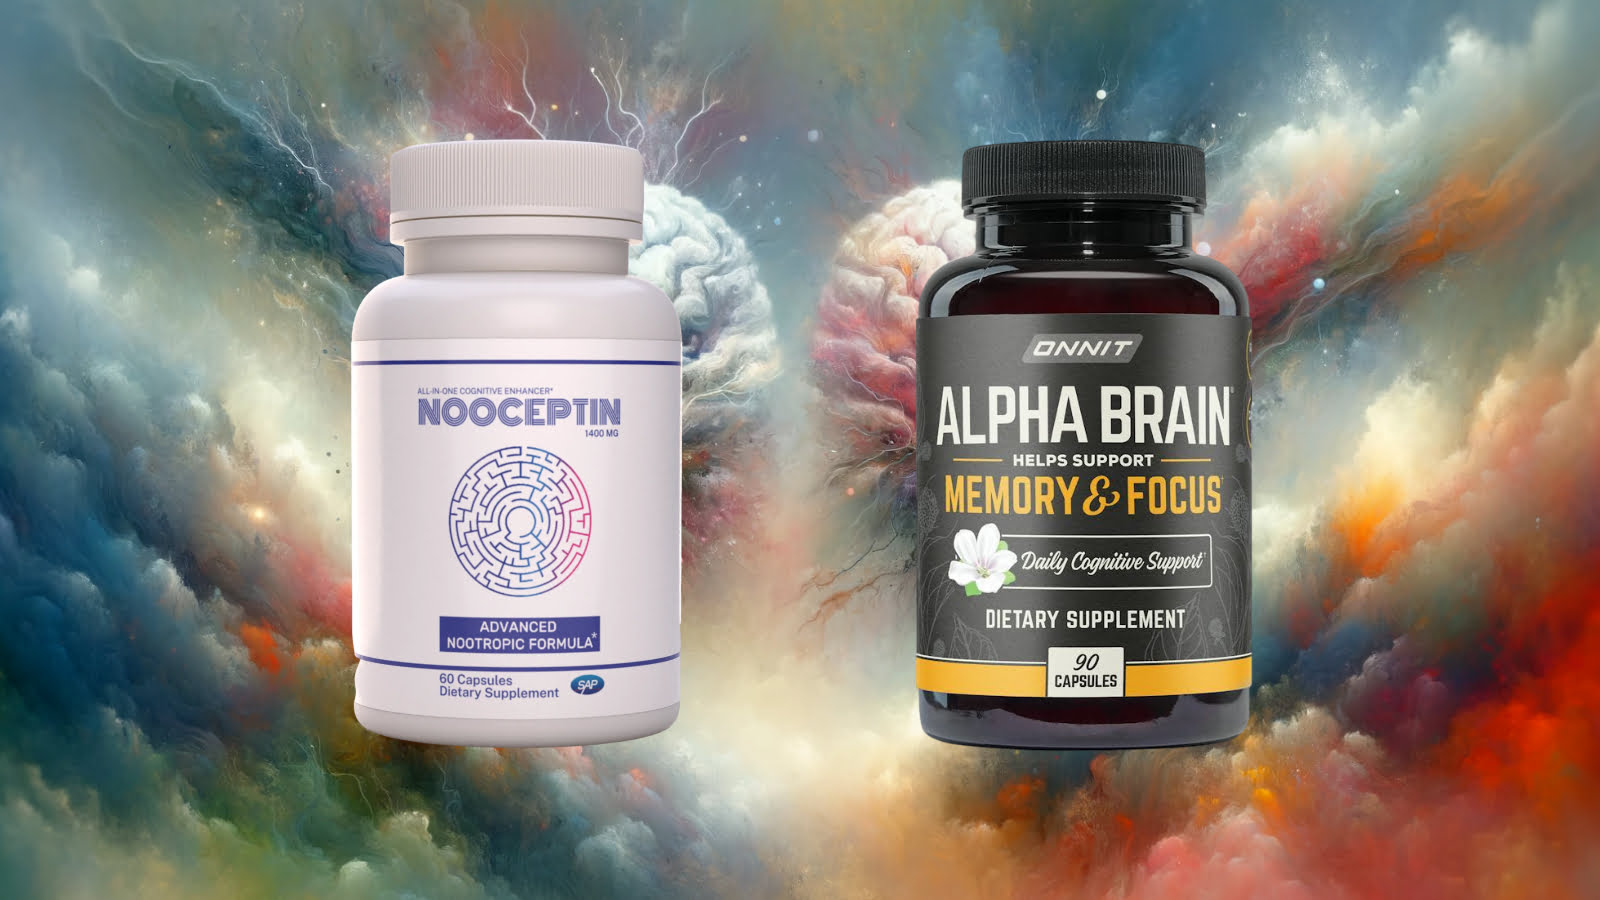 Comparing the effects of Nooceptin and Alpha Brain on brain enhancement in an abstract, artistic interpretation.